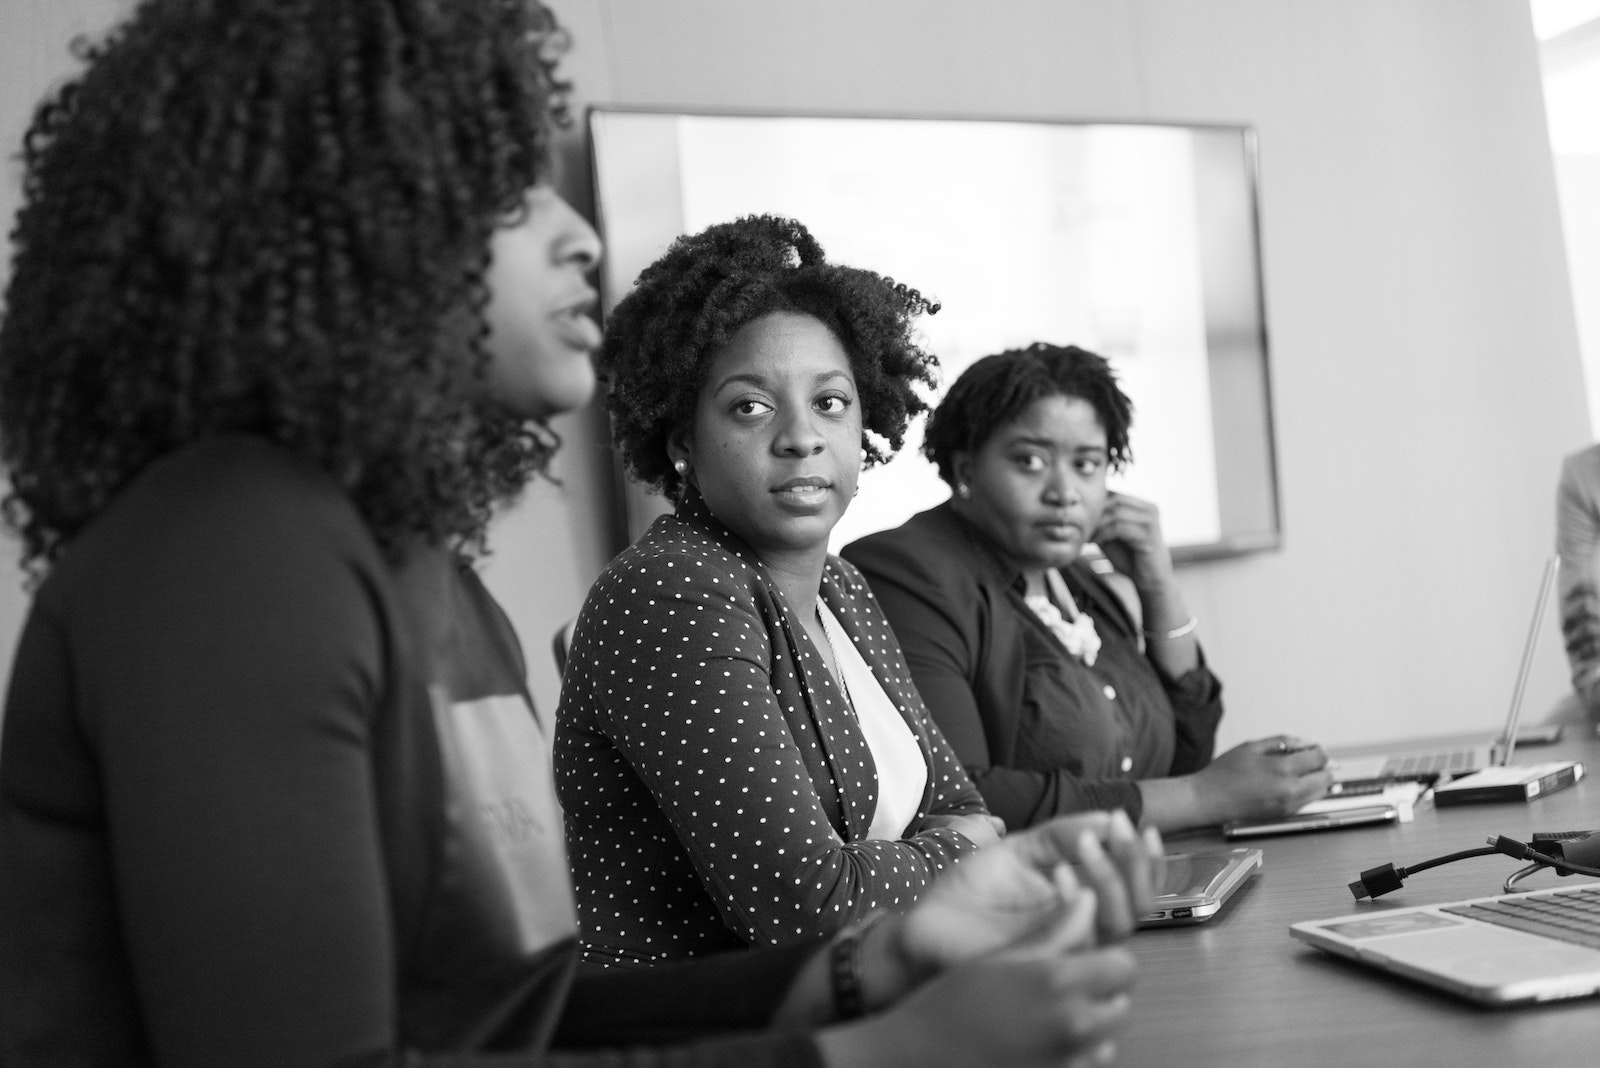 Group Of Women In Business Attire Sitting At A Table Having A Discussion.